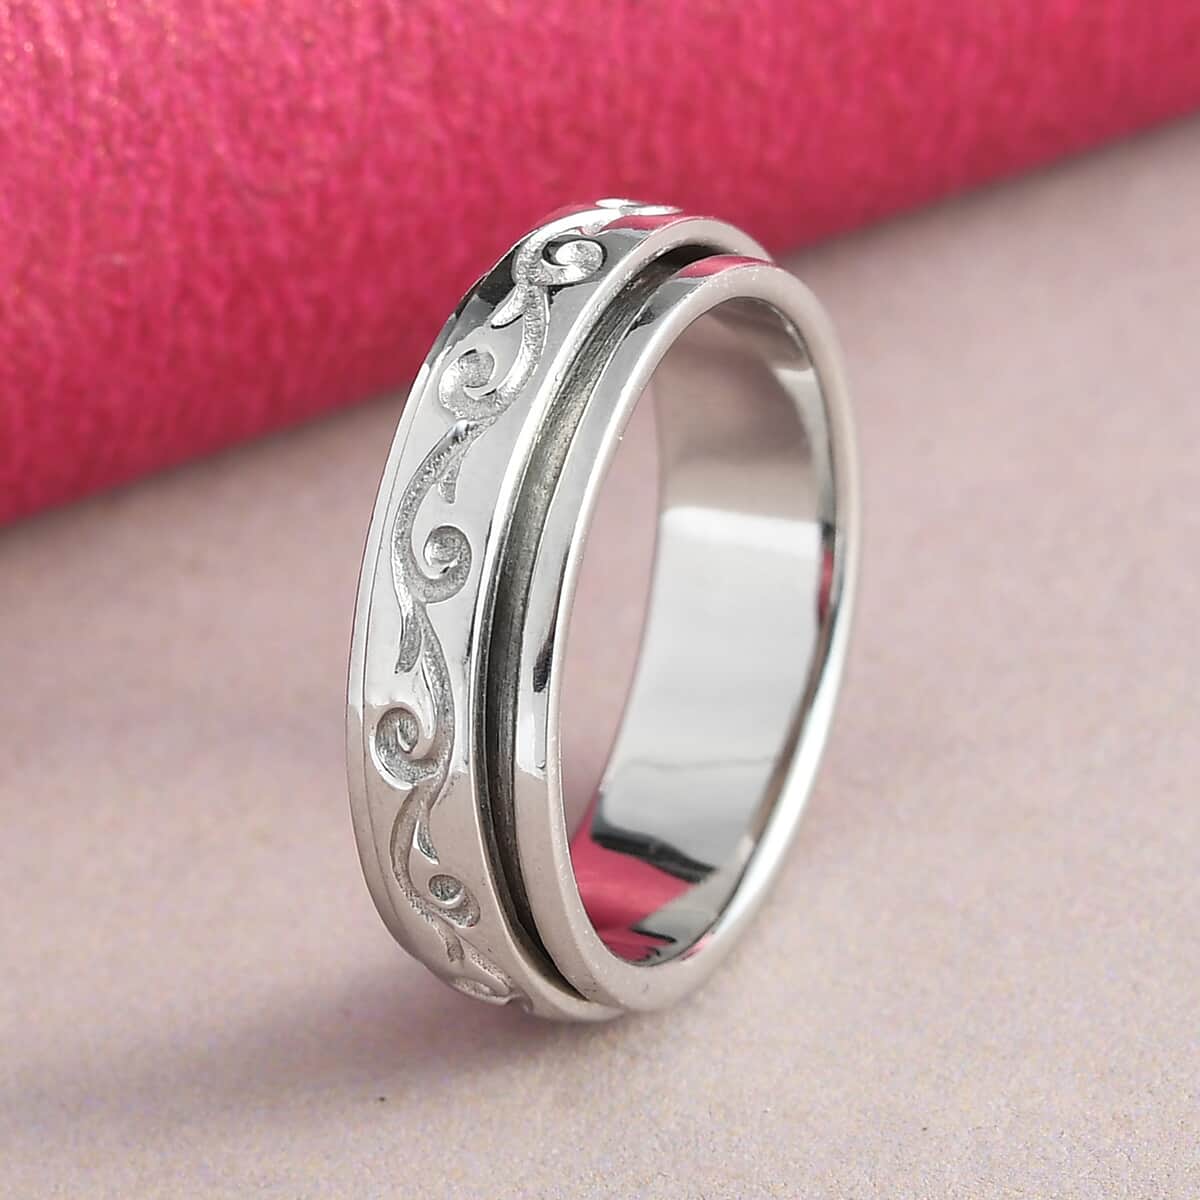 Vines Sterling Silver Spinner Ring, Anxiety Ring for Women, Fidget Rings for Anxiety, Stress Relieving Anxiety Ring image number 4